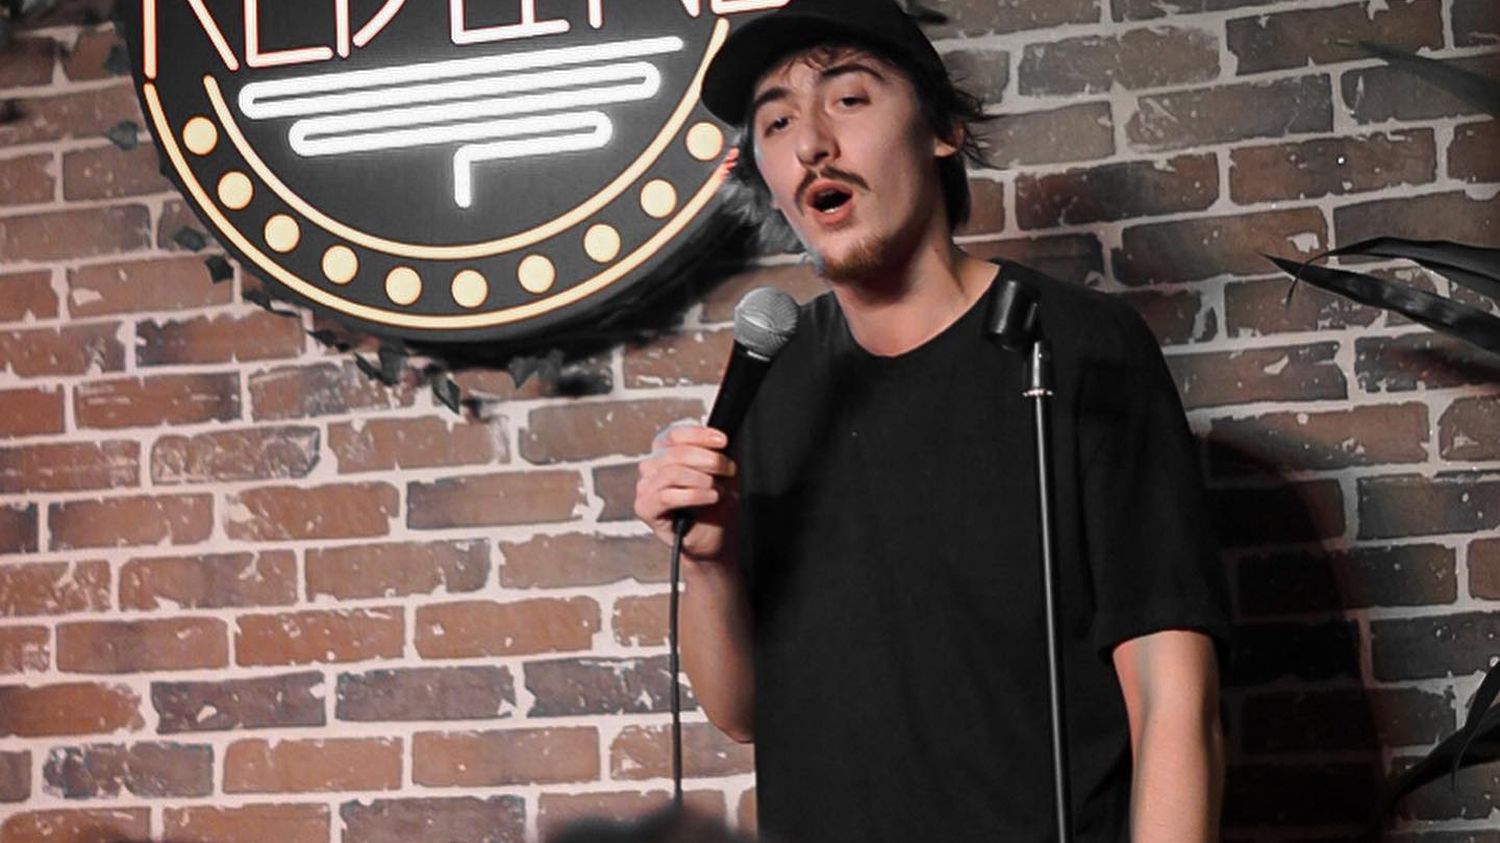 In Montpellier, a bar has been turned into a comedy club to welcome amateur stand-up performers